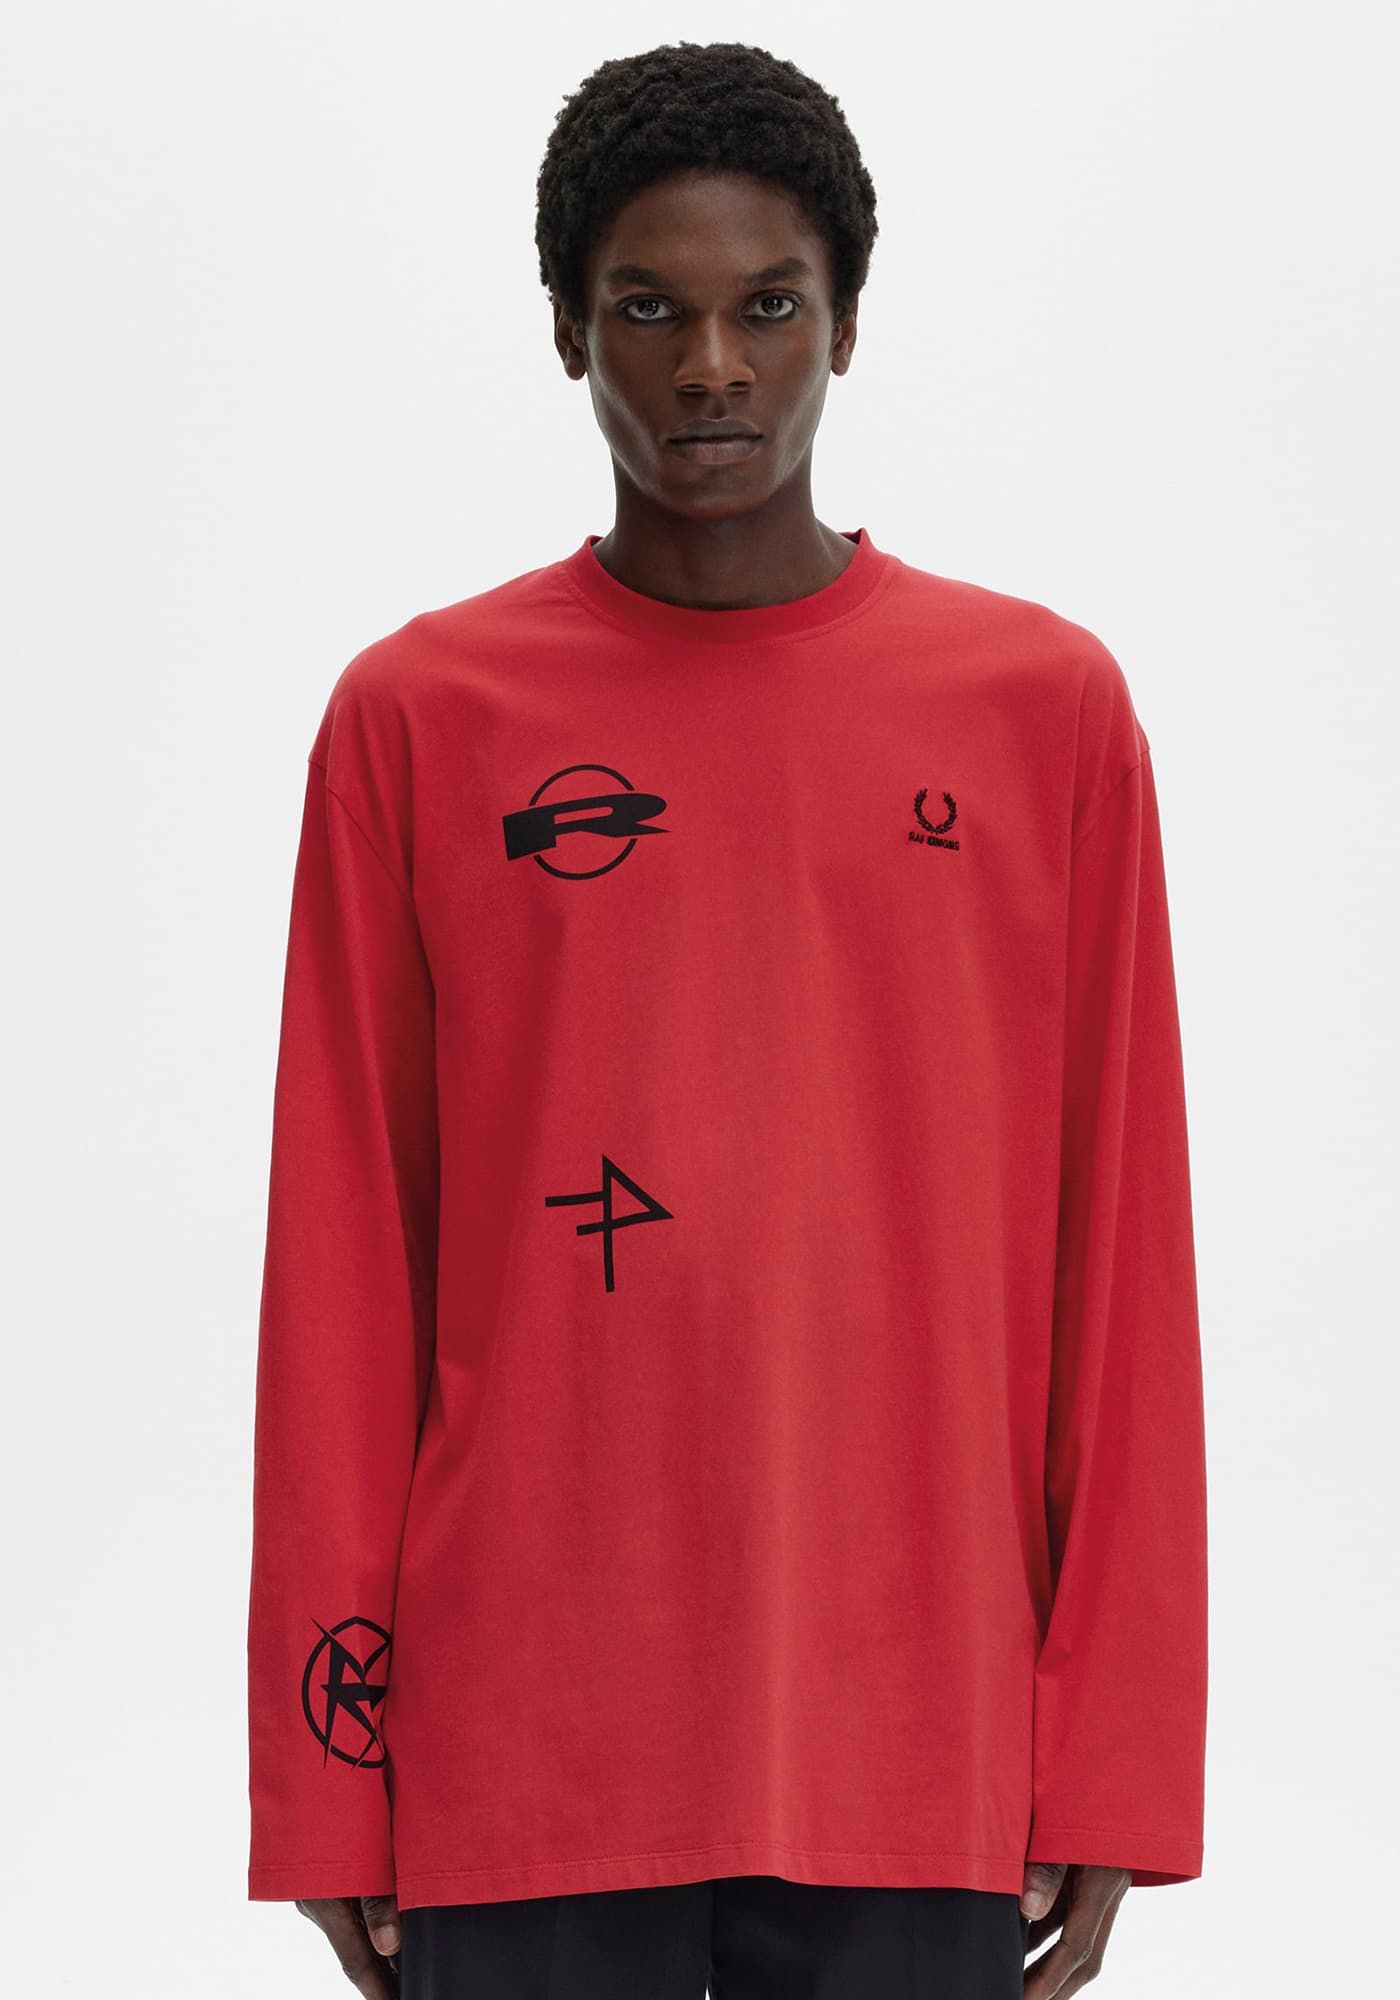 RAF SIMONS×FRED PERRY - Printed Long Sleeve T-Shirt | ALTERFATE